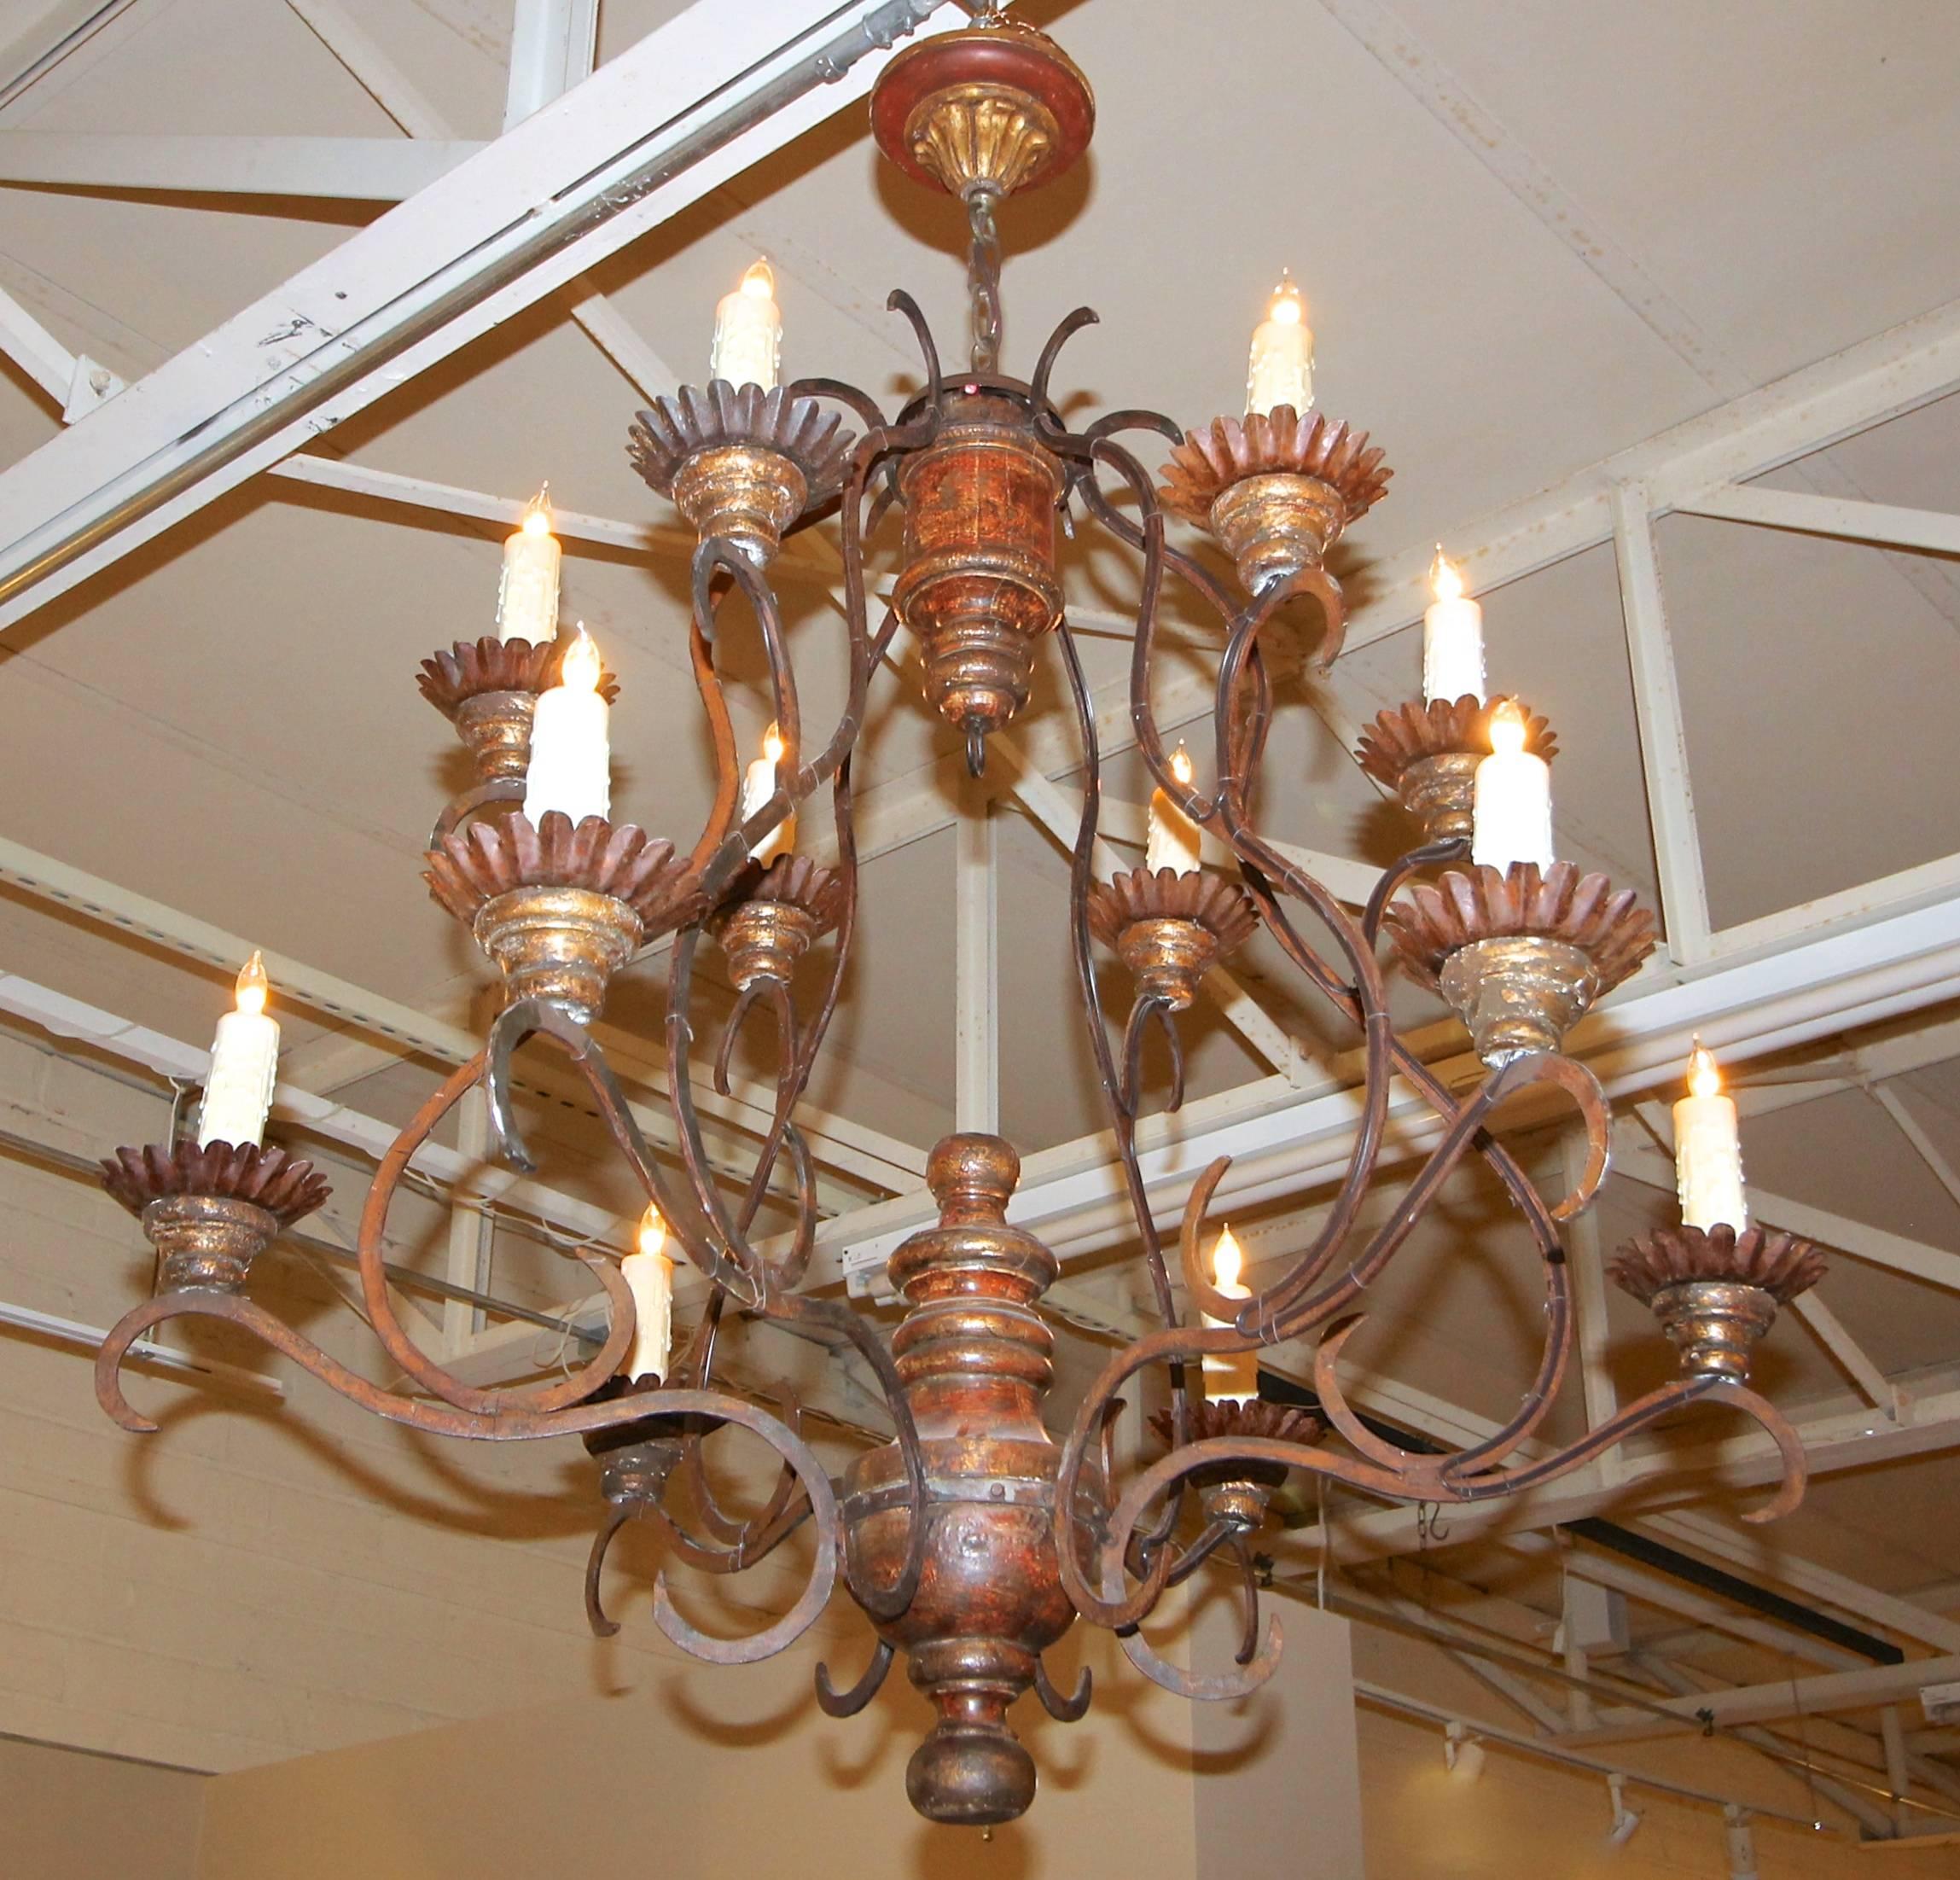 Large Italian style twelve-light cage form chandelier with wood turned elements in aged gilt and painted finish. Aged iron arms and drip pans. Wired for US. 

Overall height including chain and ceiling cap 50